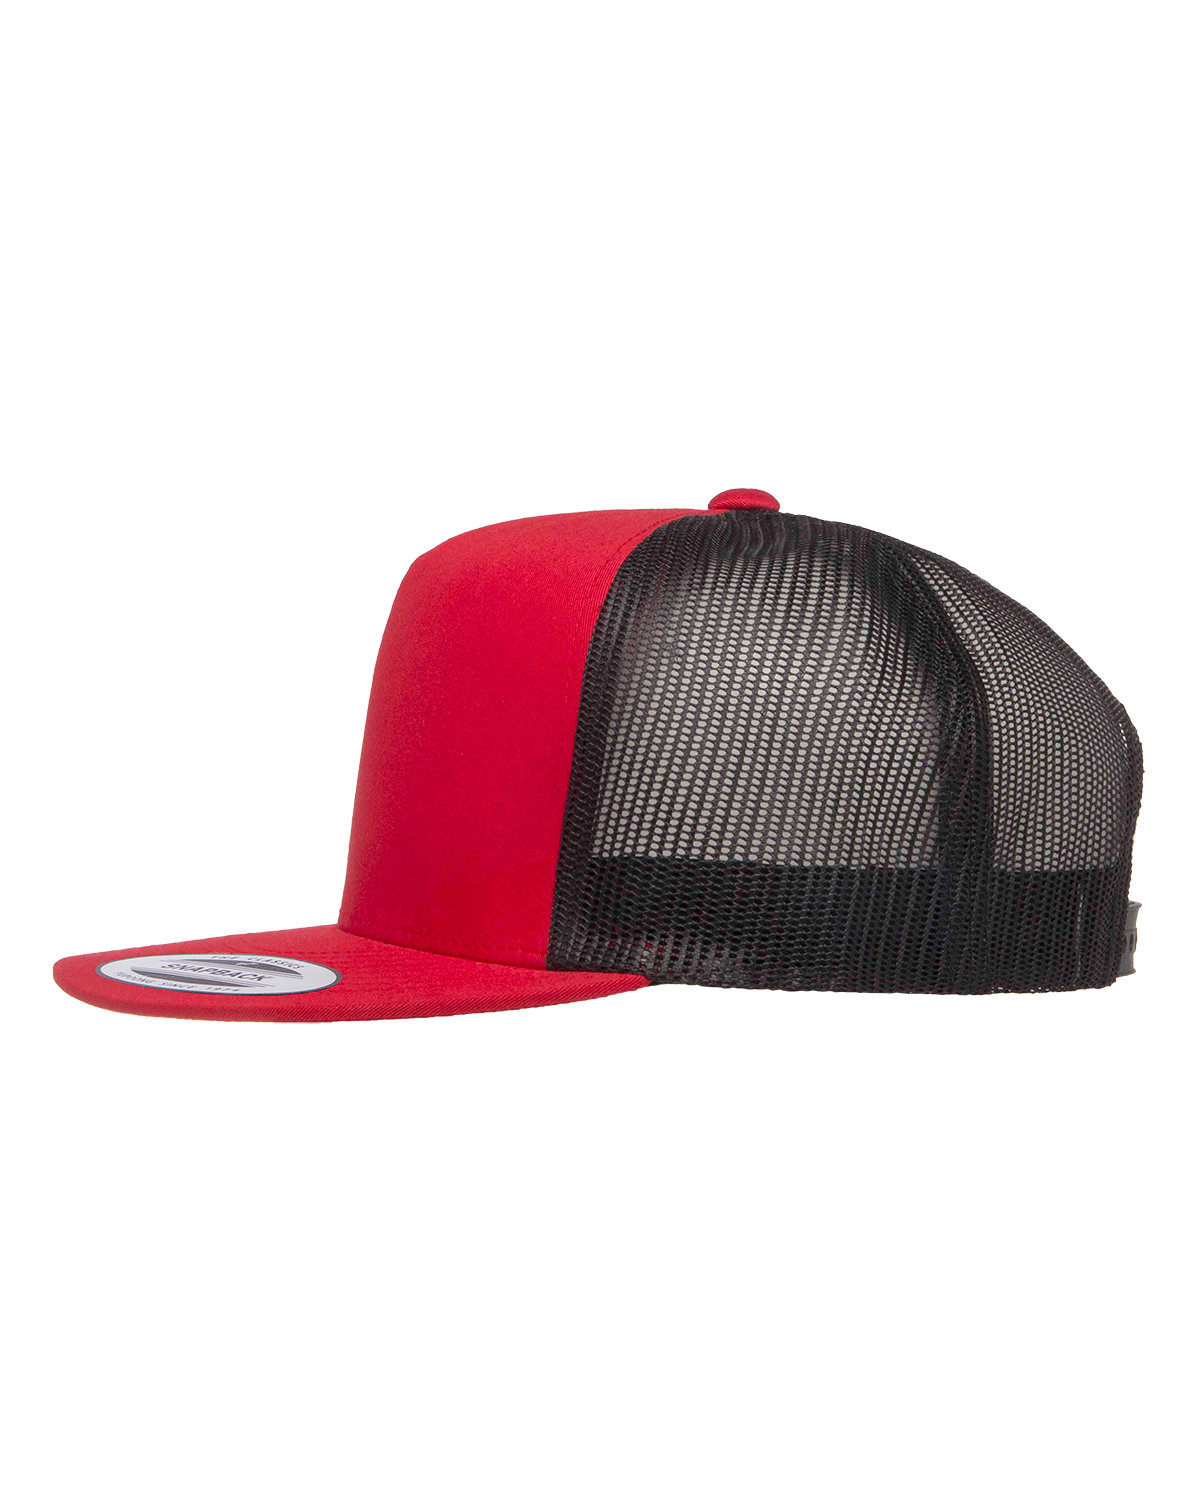 Yupoong Adult 5-Panel Classic Trucker Cap | Generic Site - Priced